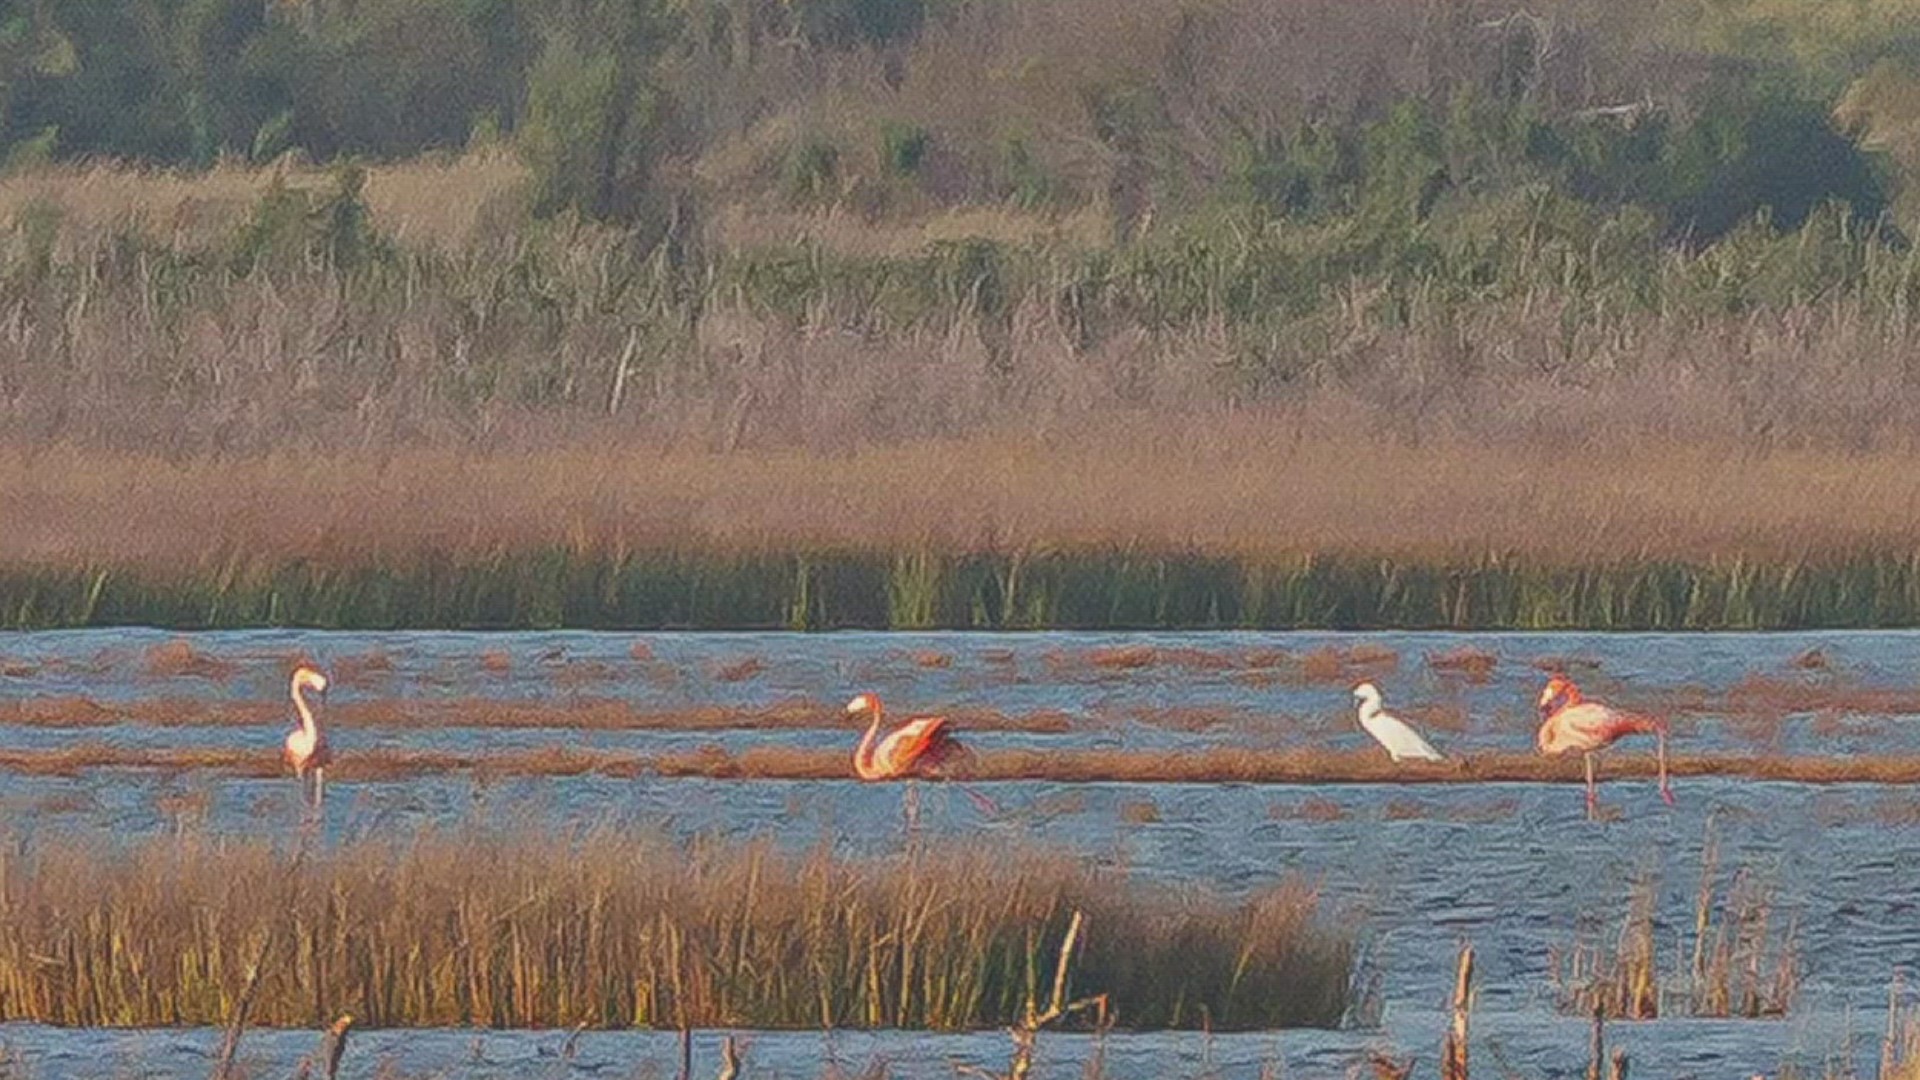 The group of pink flamingoes has arrived in the Coastal Bend, but the fickle fowl are keeping their distance, making it hard to catch a glimpse.